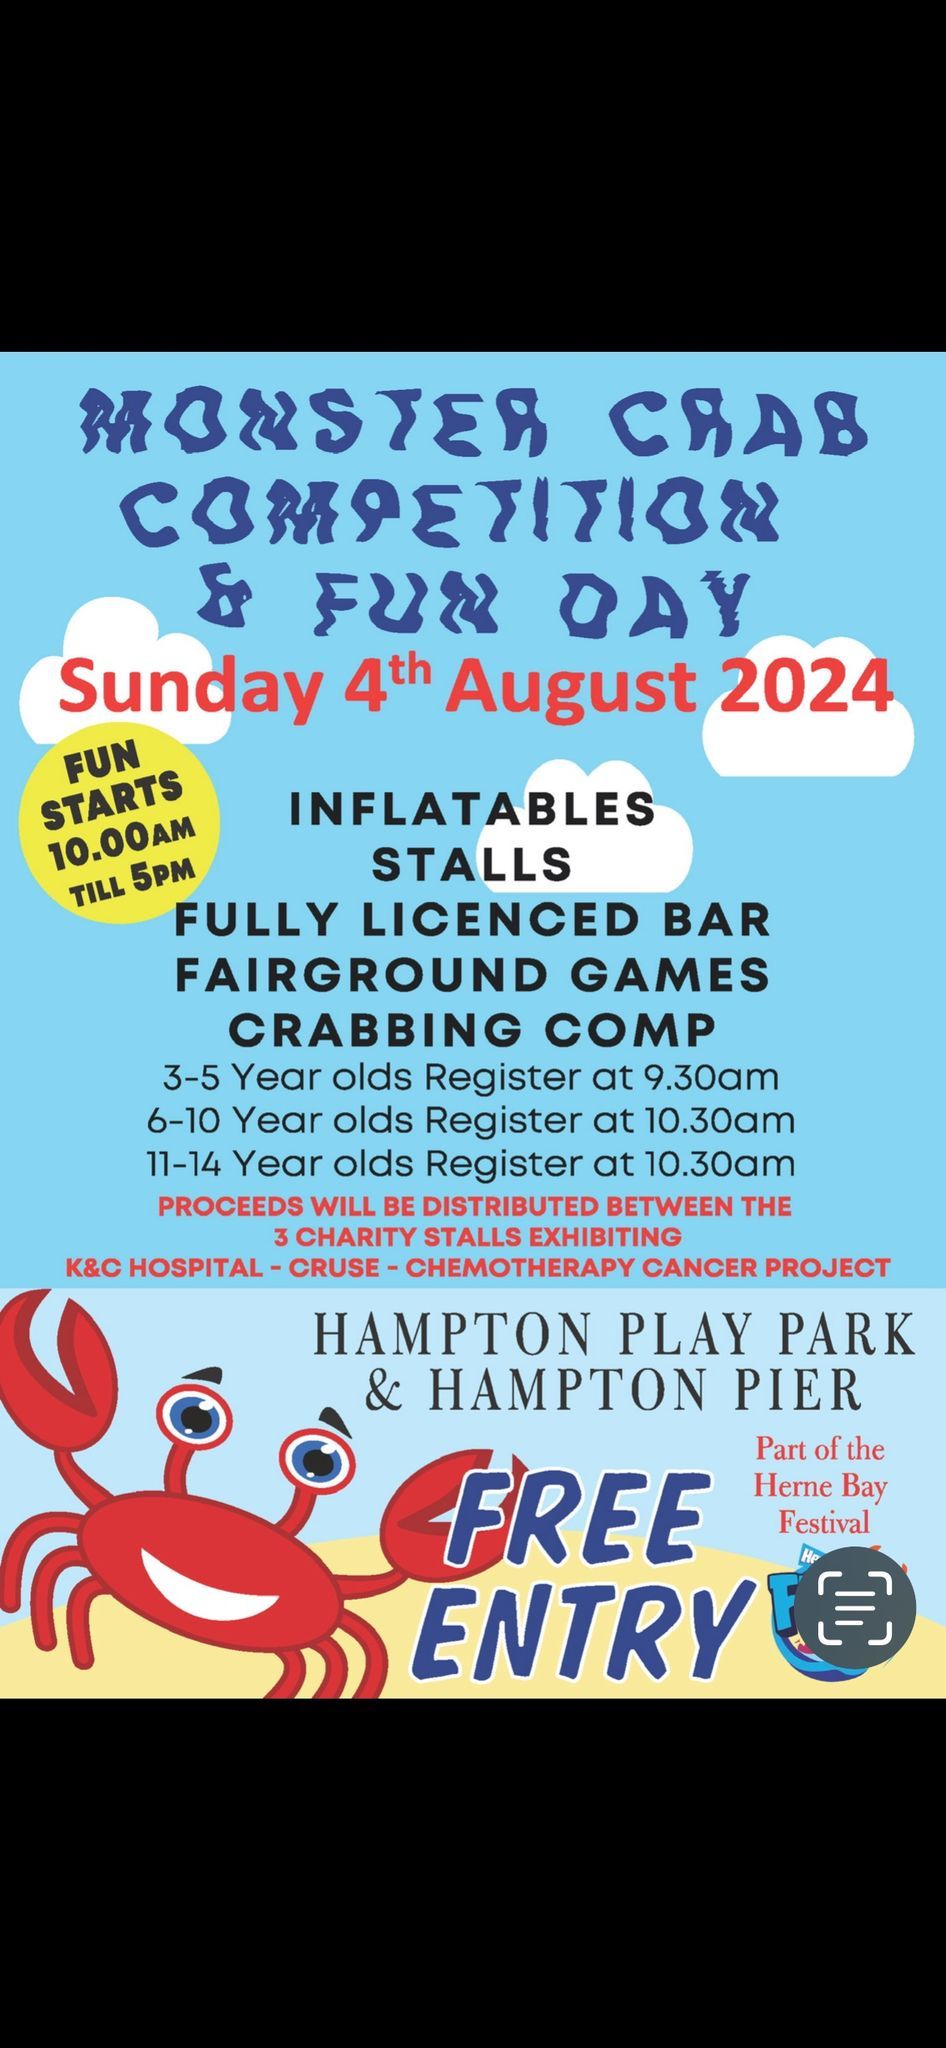 Monster Crabbing Competition & Fun Day